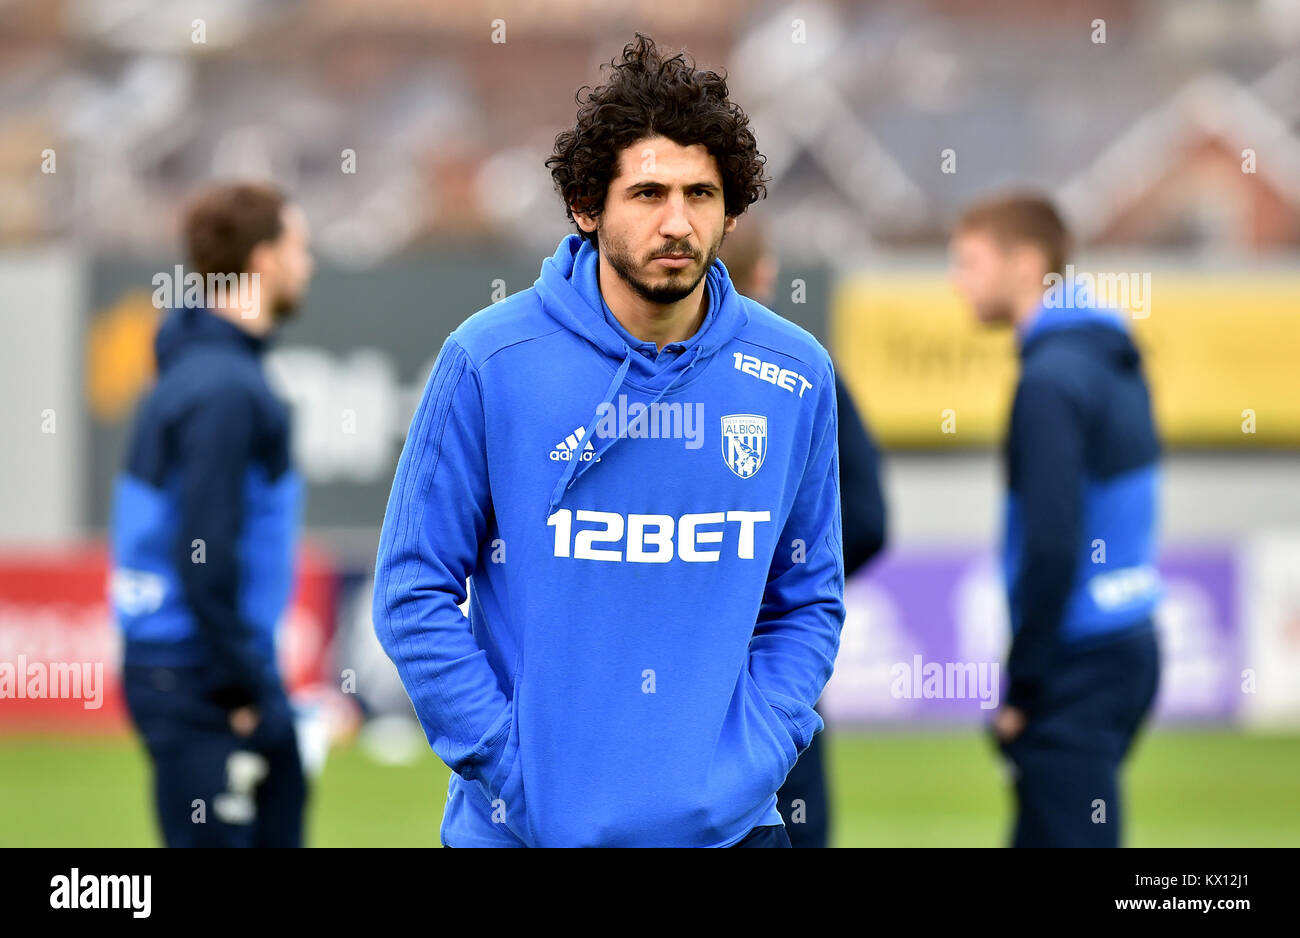 West Bromwich Albion's Ahmed Hegazy prior to the FA Cup, third round match at St James' Park, Exeter. PRESS ASSOCIATION Photo. Picture date: Saturday January 6, 2018. See PA story SOCCER Exeter. Photo credit should read: Simon Galloway/PA Wire. RESTRICTIONS: EDITORIAL USE ONLY No use with unauthorised audio, video, data, fixture lists, club/league logos or 'live' services. Online in-match use limited to 75 images, no video emulation. No use in betting, games or single club/league/player publications. Stock Photo